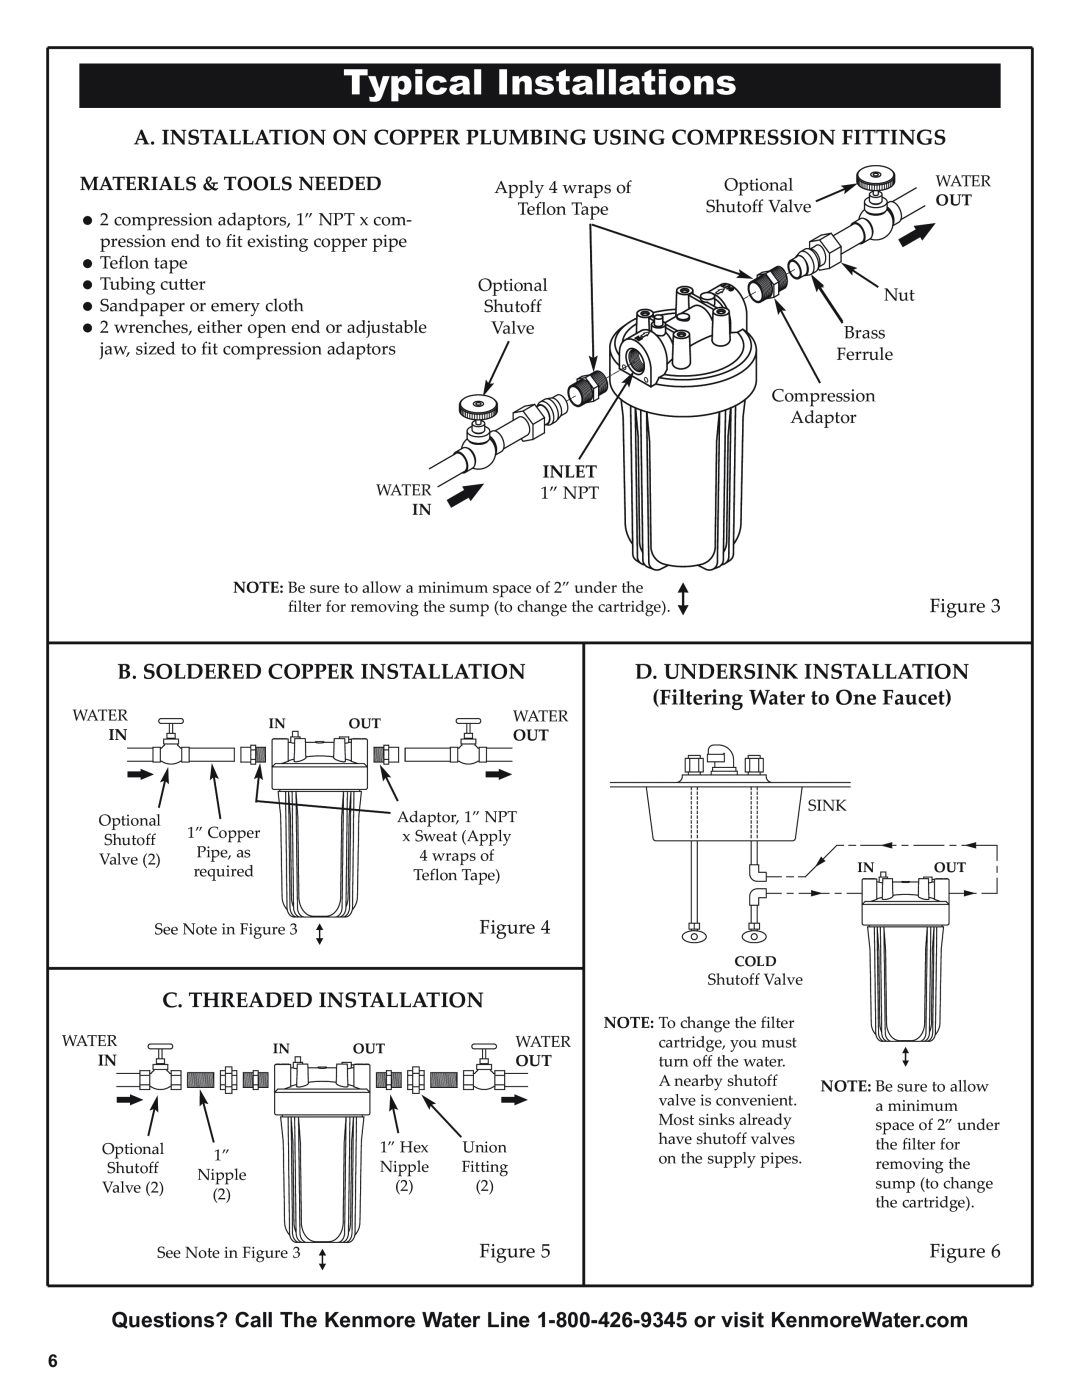 Kenmore 625.38448 owner manual Typical Installations, A. Installation On Copper Plumbing Using Compression Fittings 